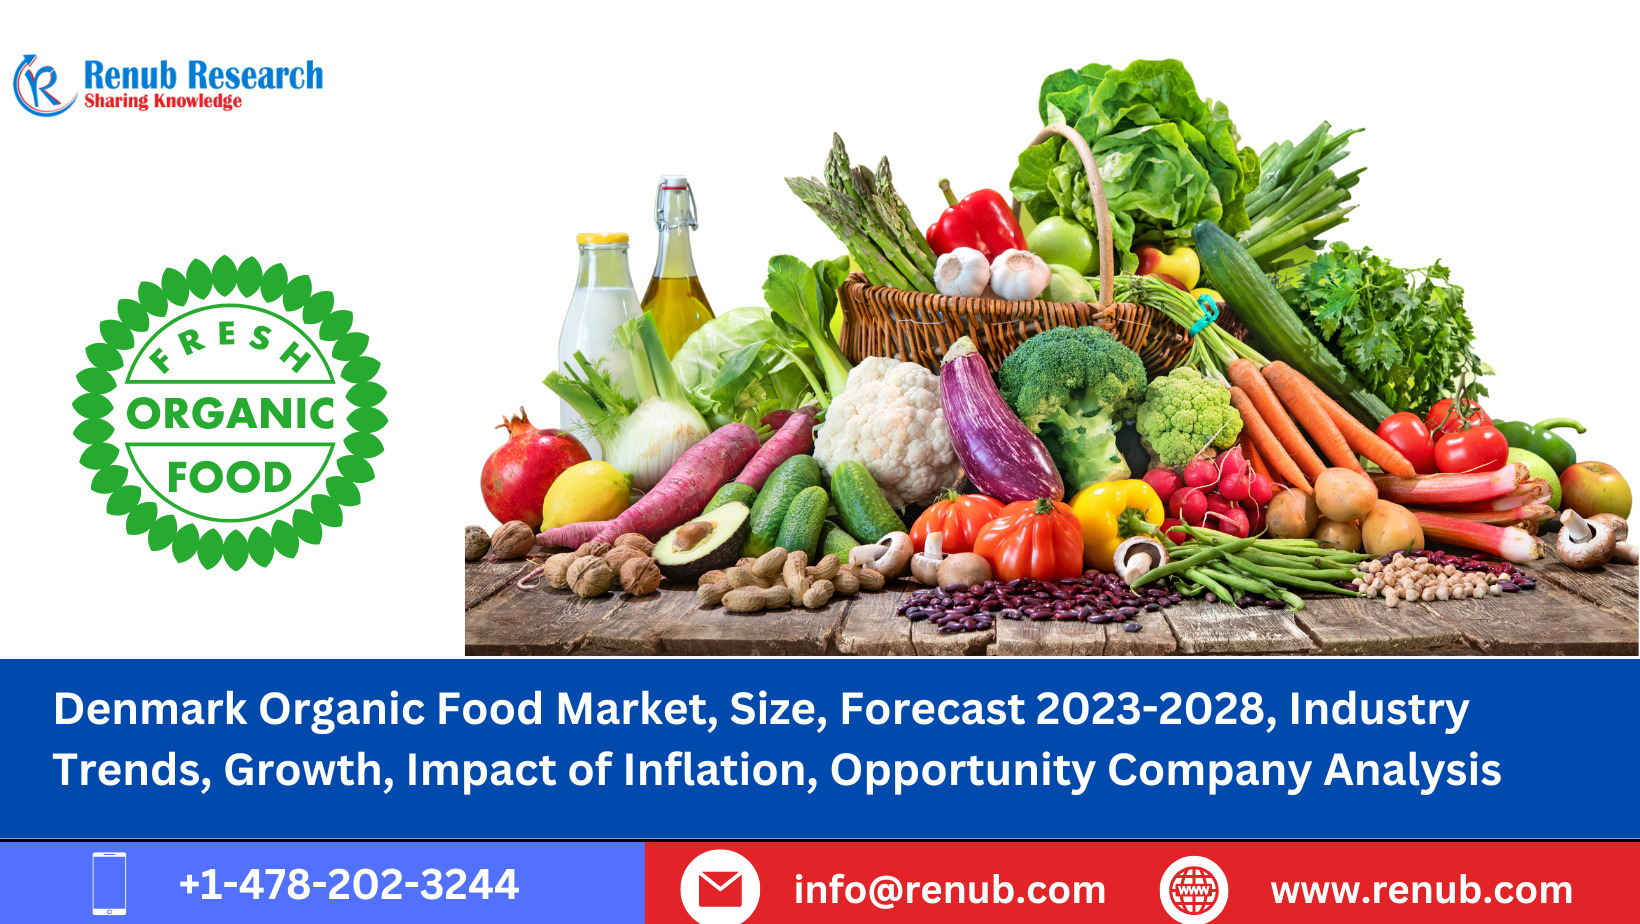 Denmark’s Organic Food Market 2023: Trends, Challenges, and Opportunities 2028. 12